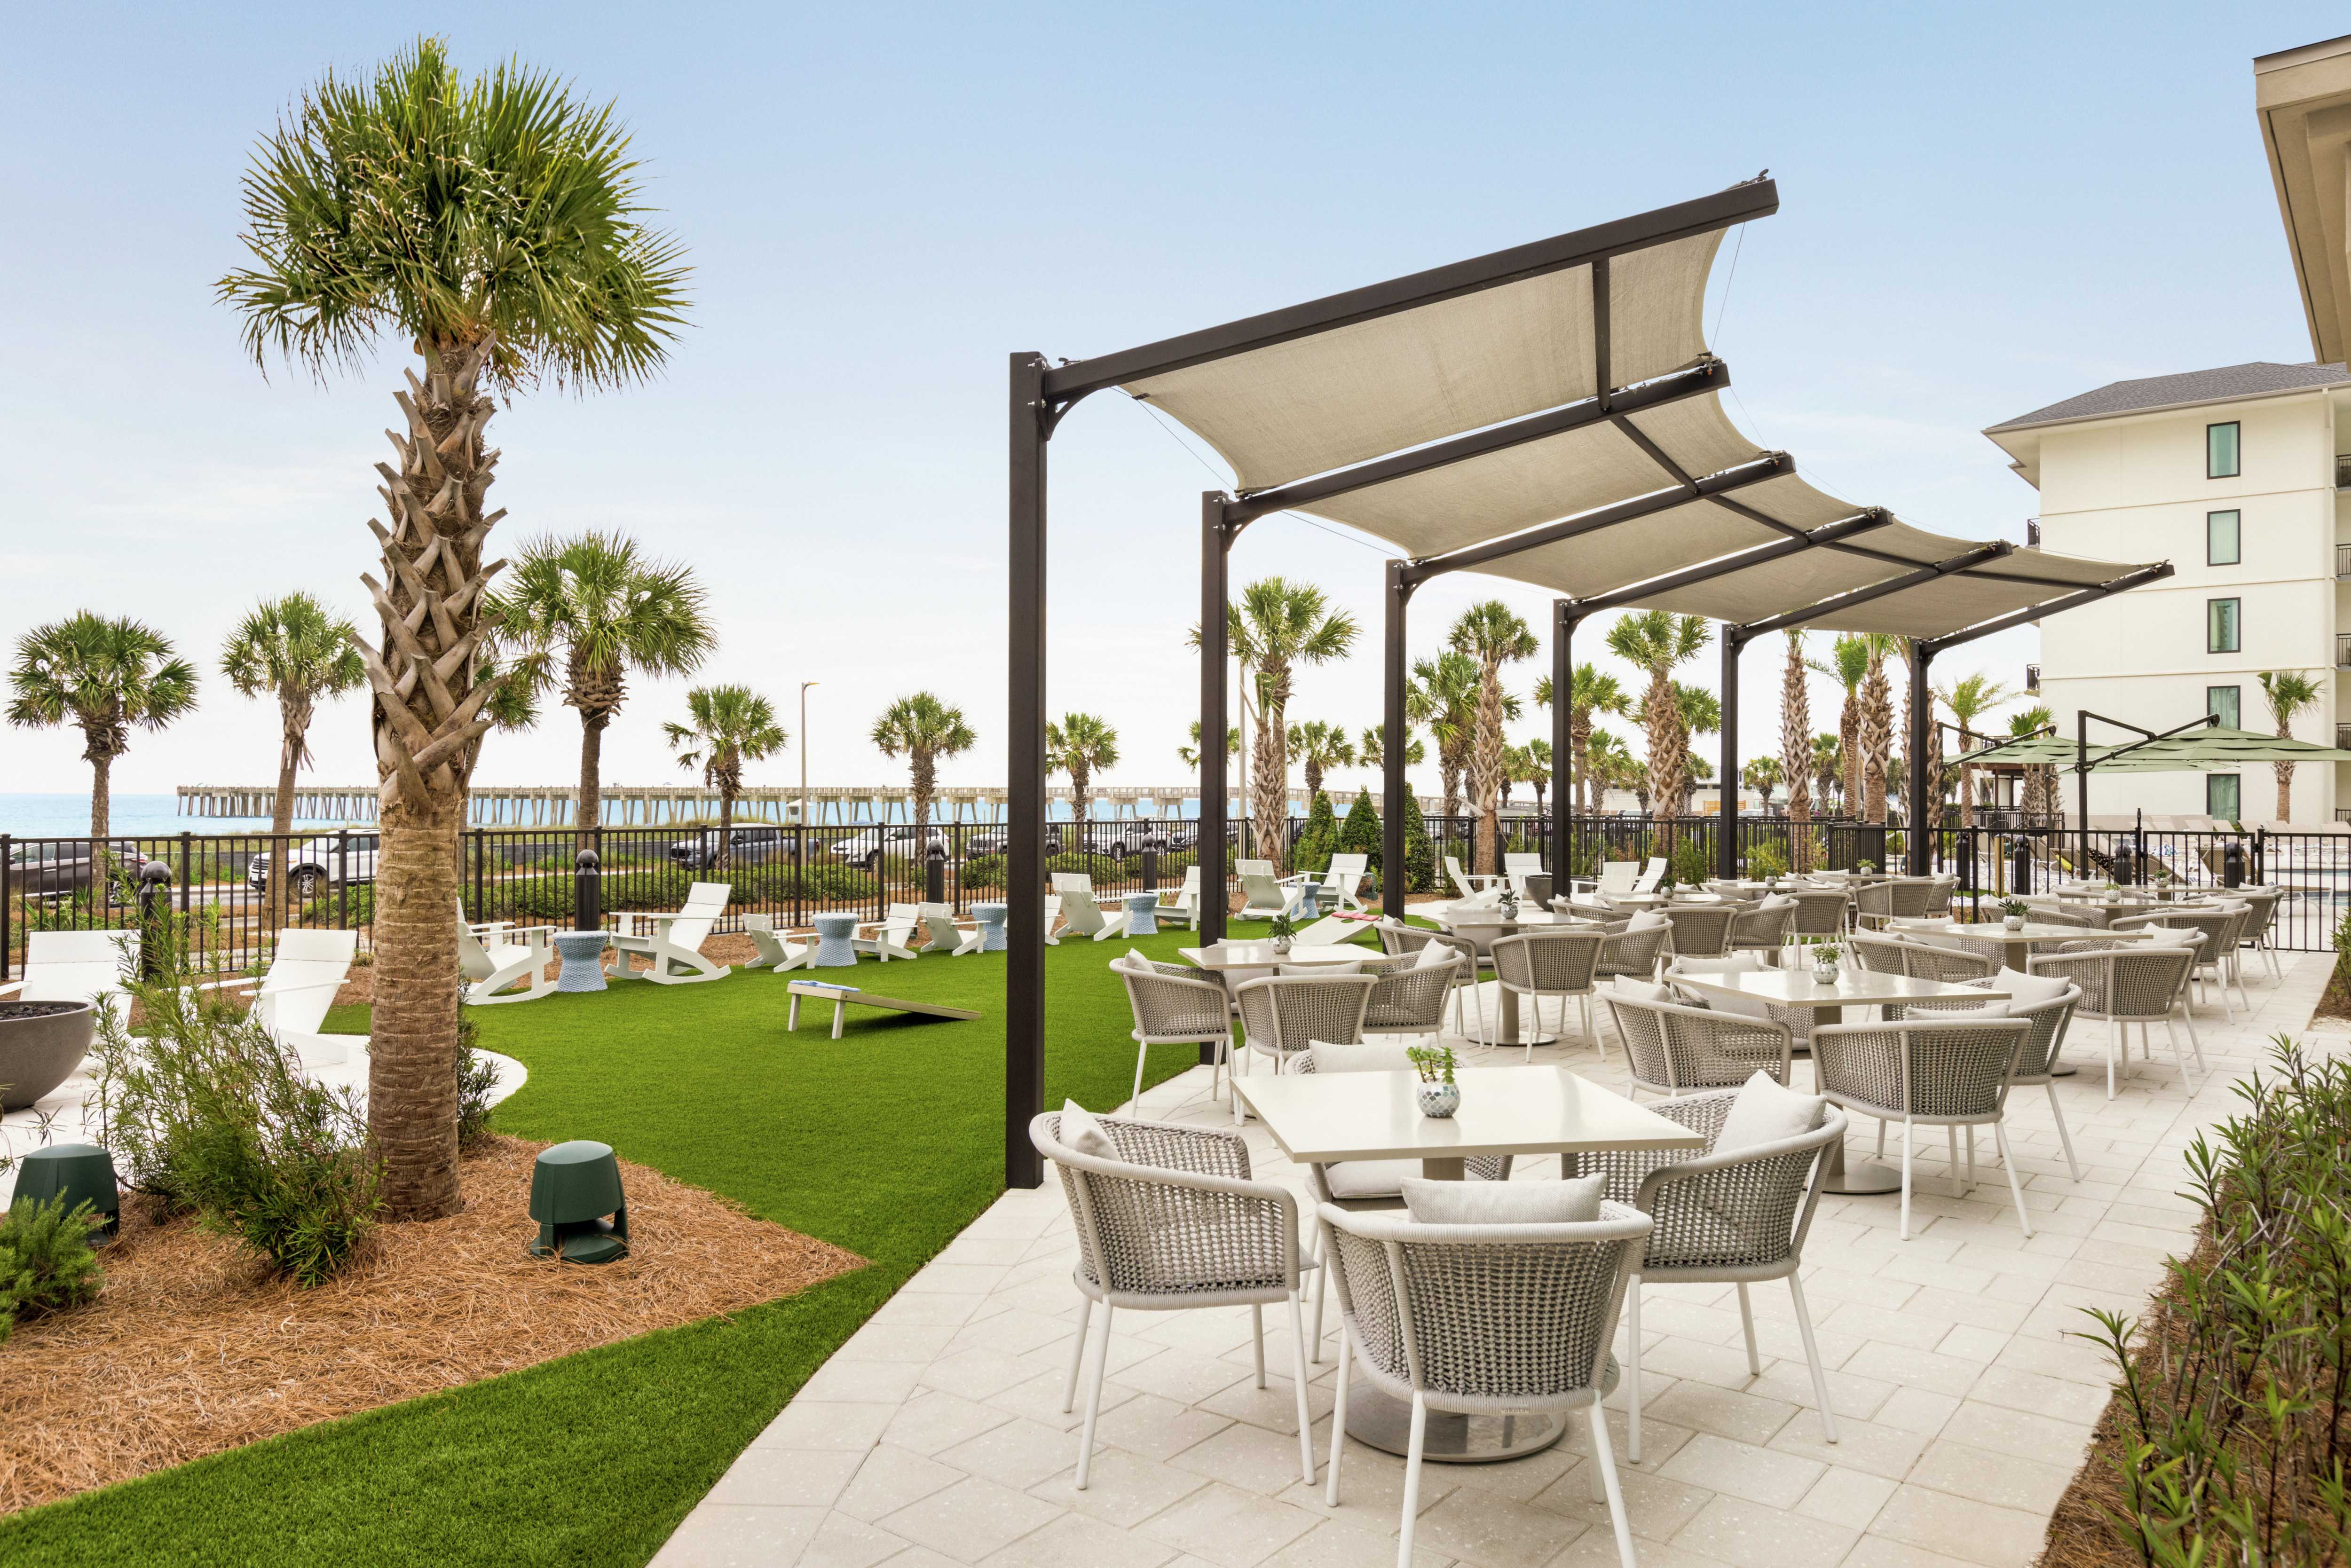 Expansive outdoor restaurant seating area featuring, fire pit, lush palm trees and ocean views